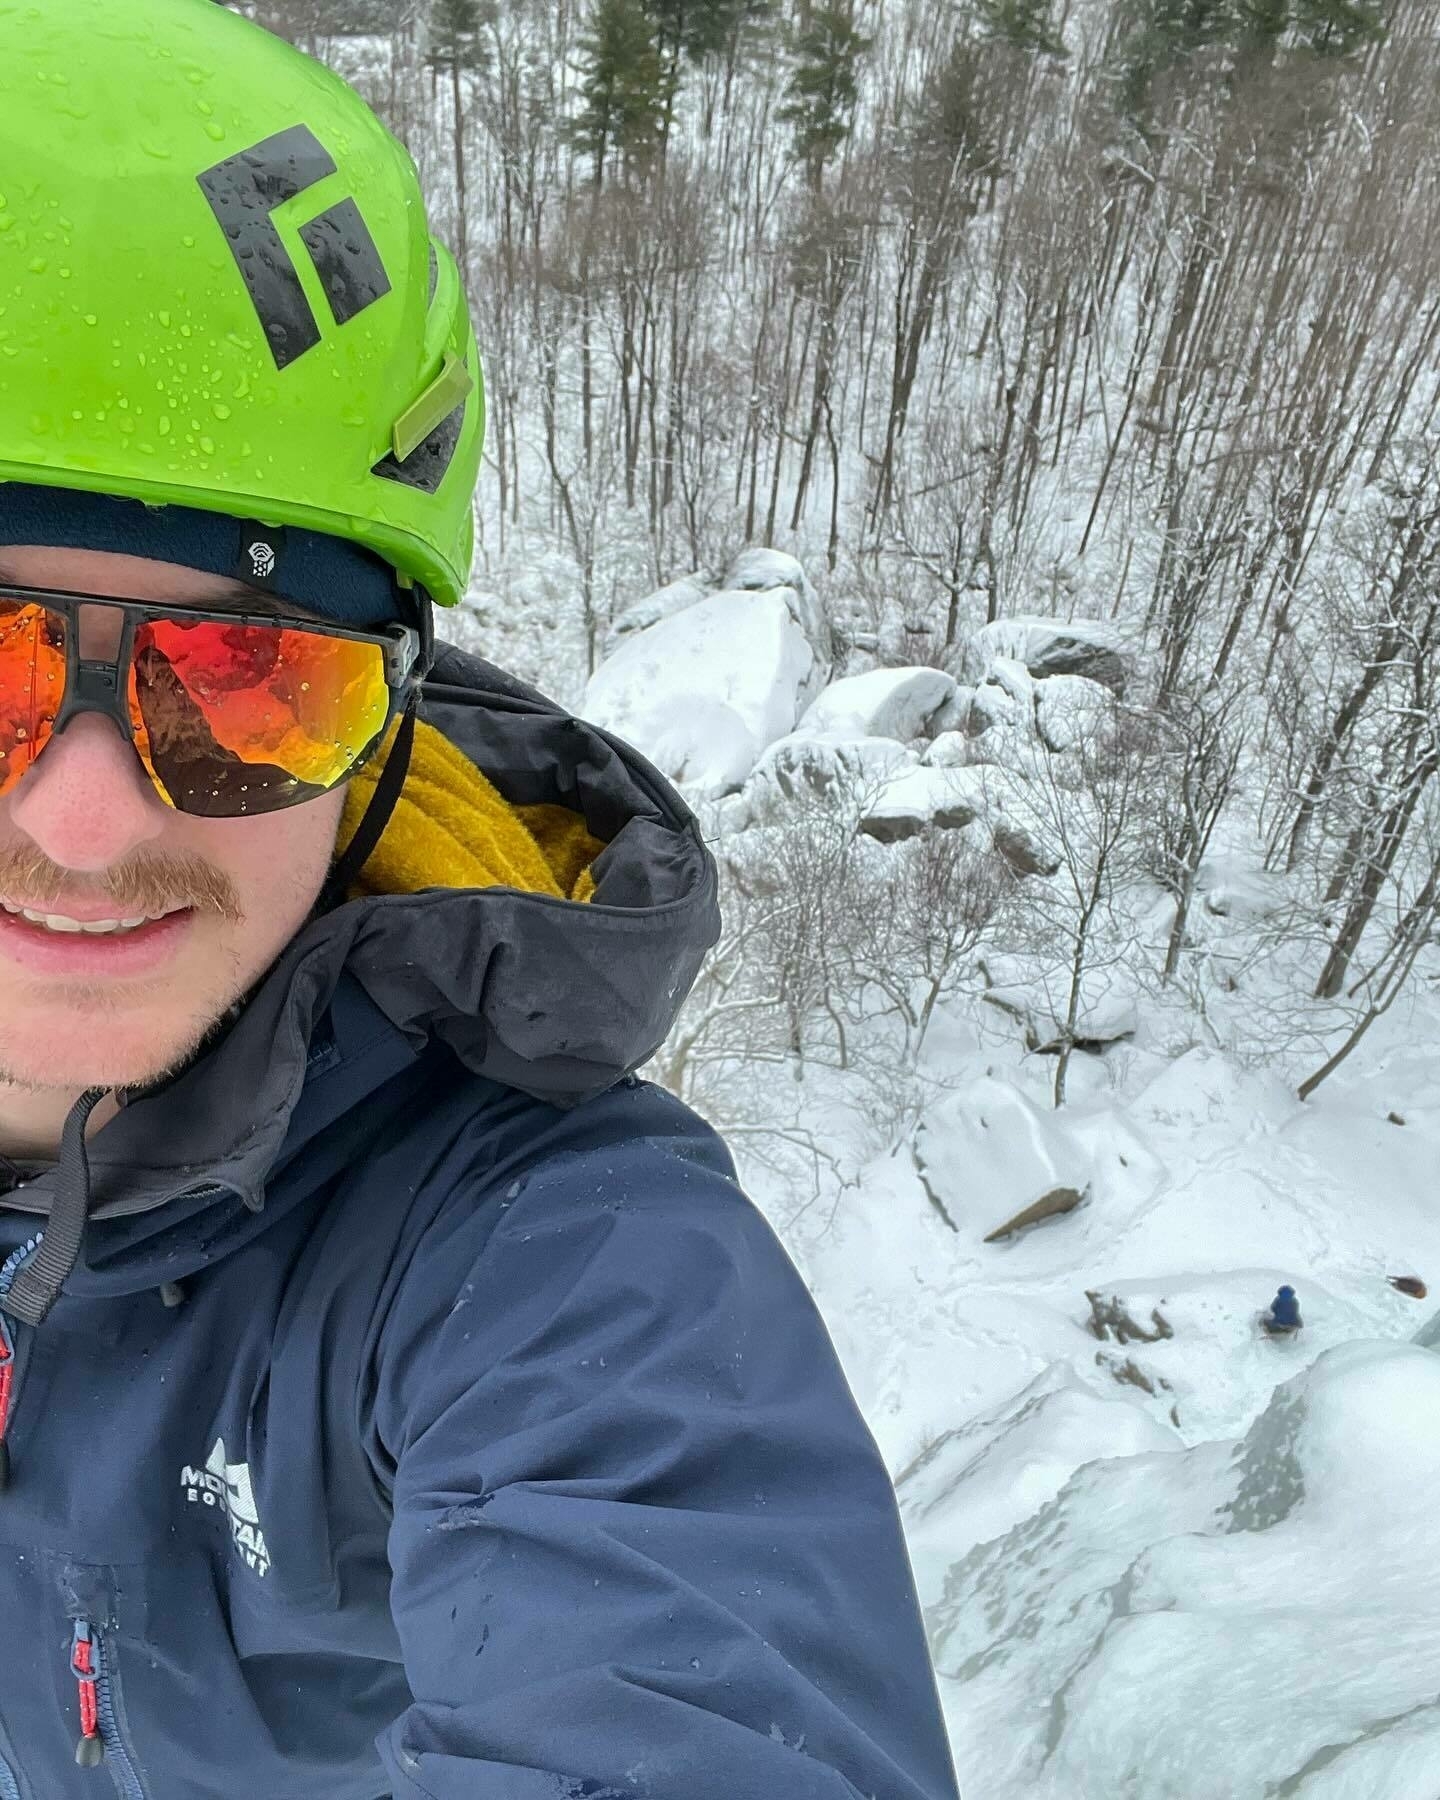 A person in a green helmet and sunglasses is taking a selfie in a snowy forested area with rocks partially covered in snow.